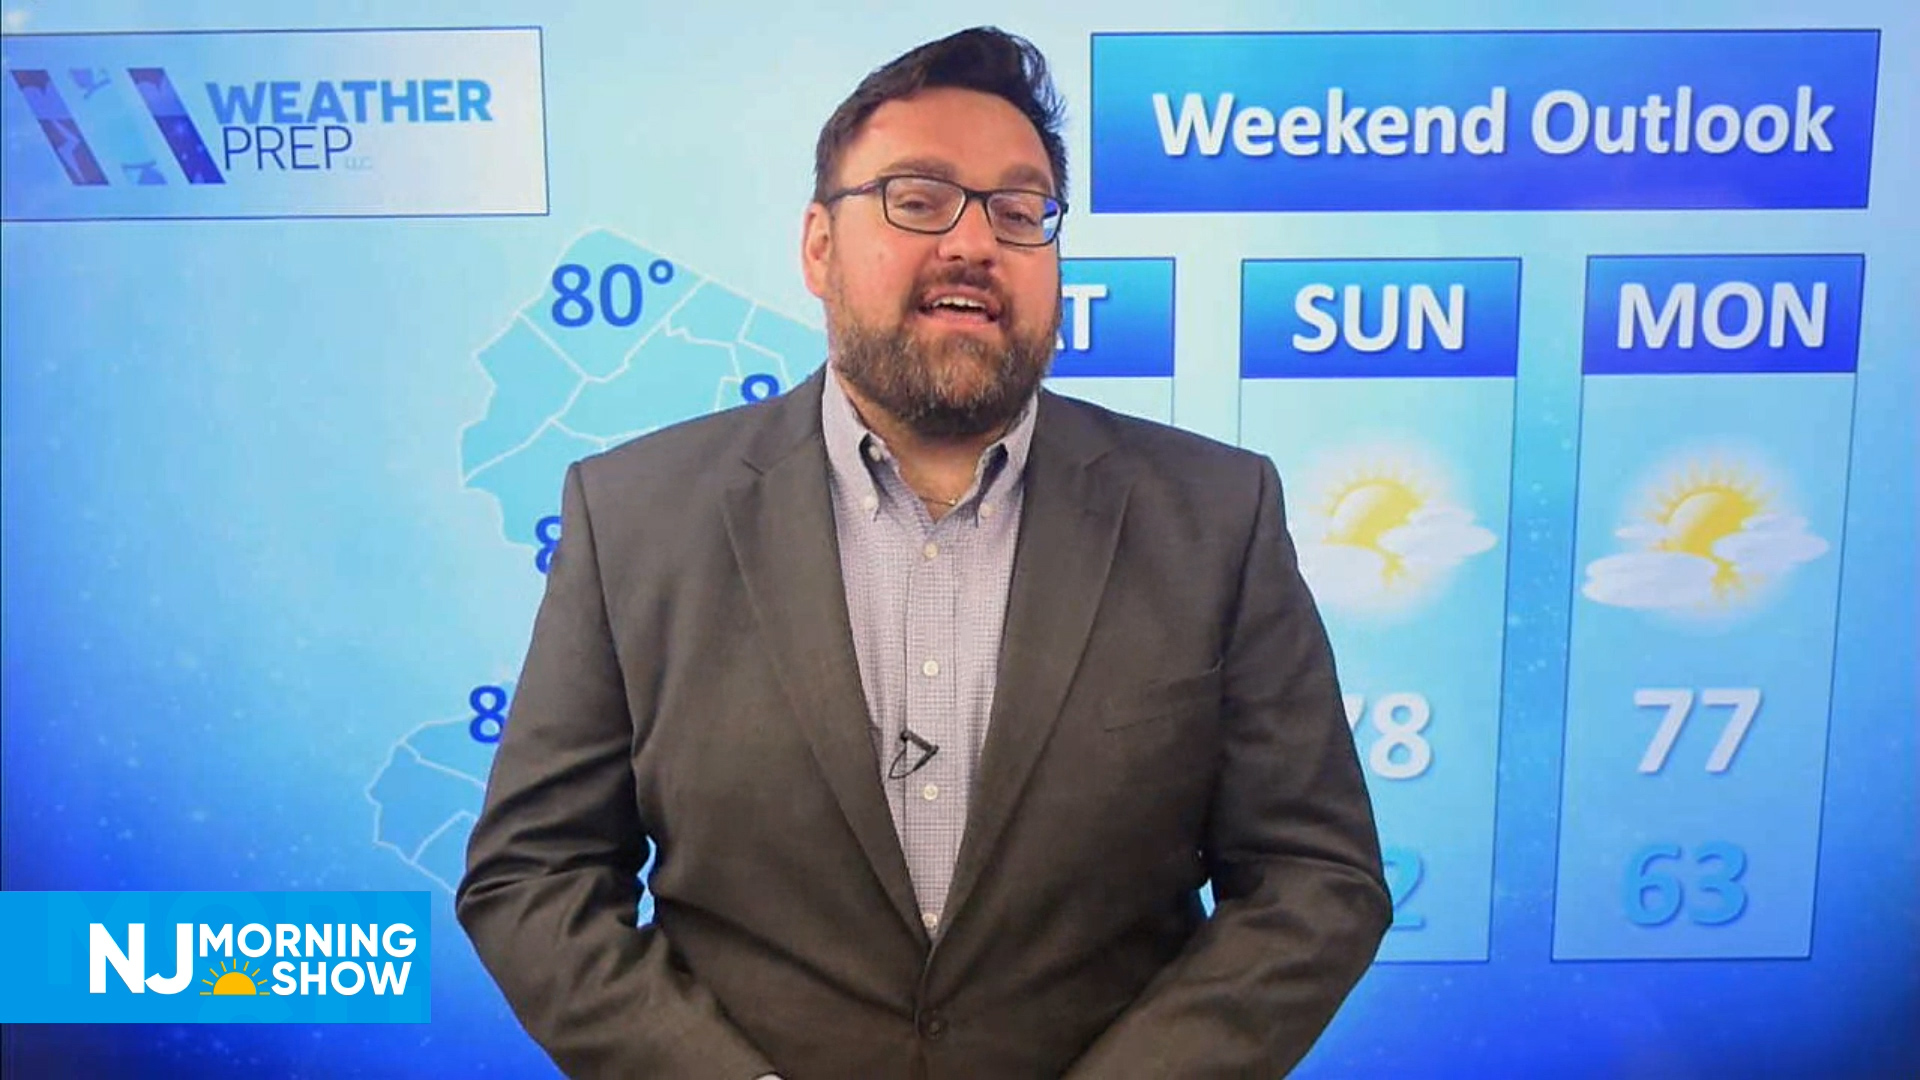 NJ Morning Show – 3 Day Forcast